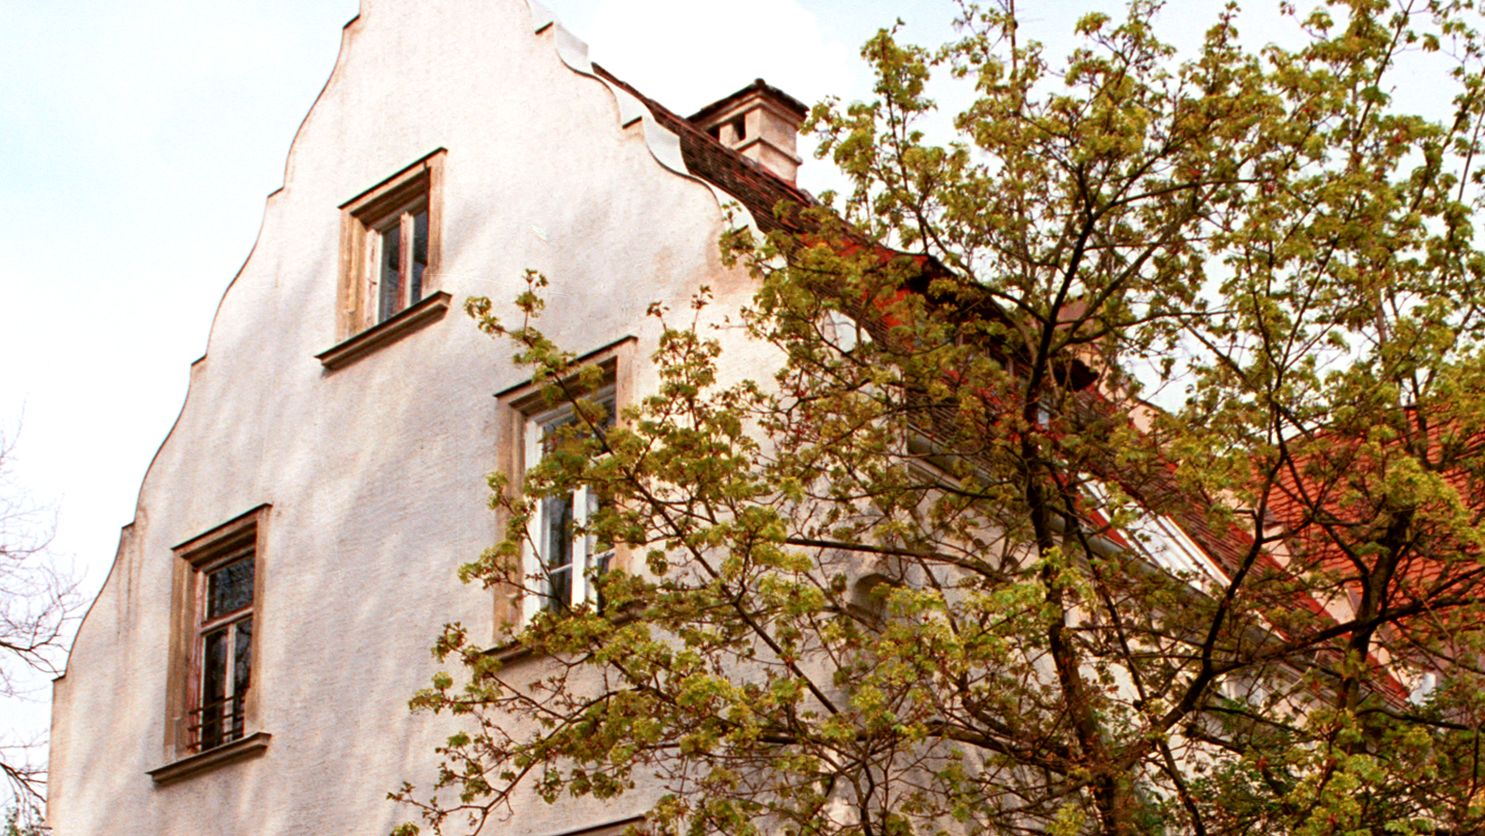 Artists´ House of Hans von Hayek, white, gable-fronted house. Picture: City of Dachau, Peter Riester